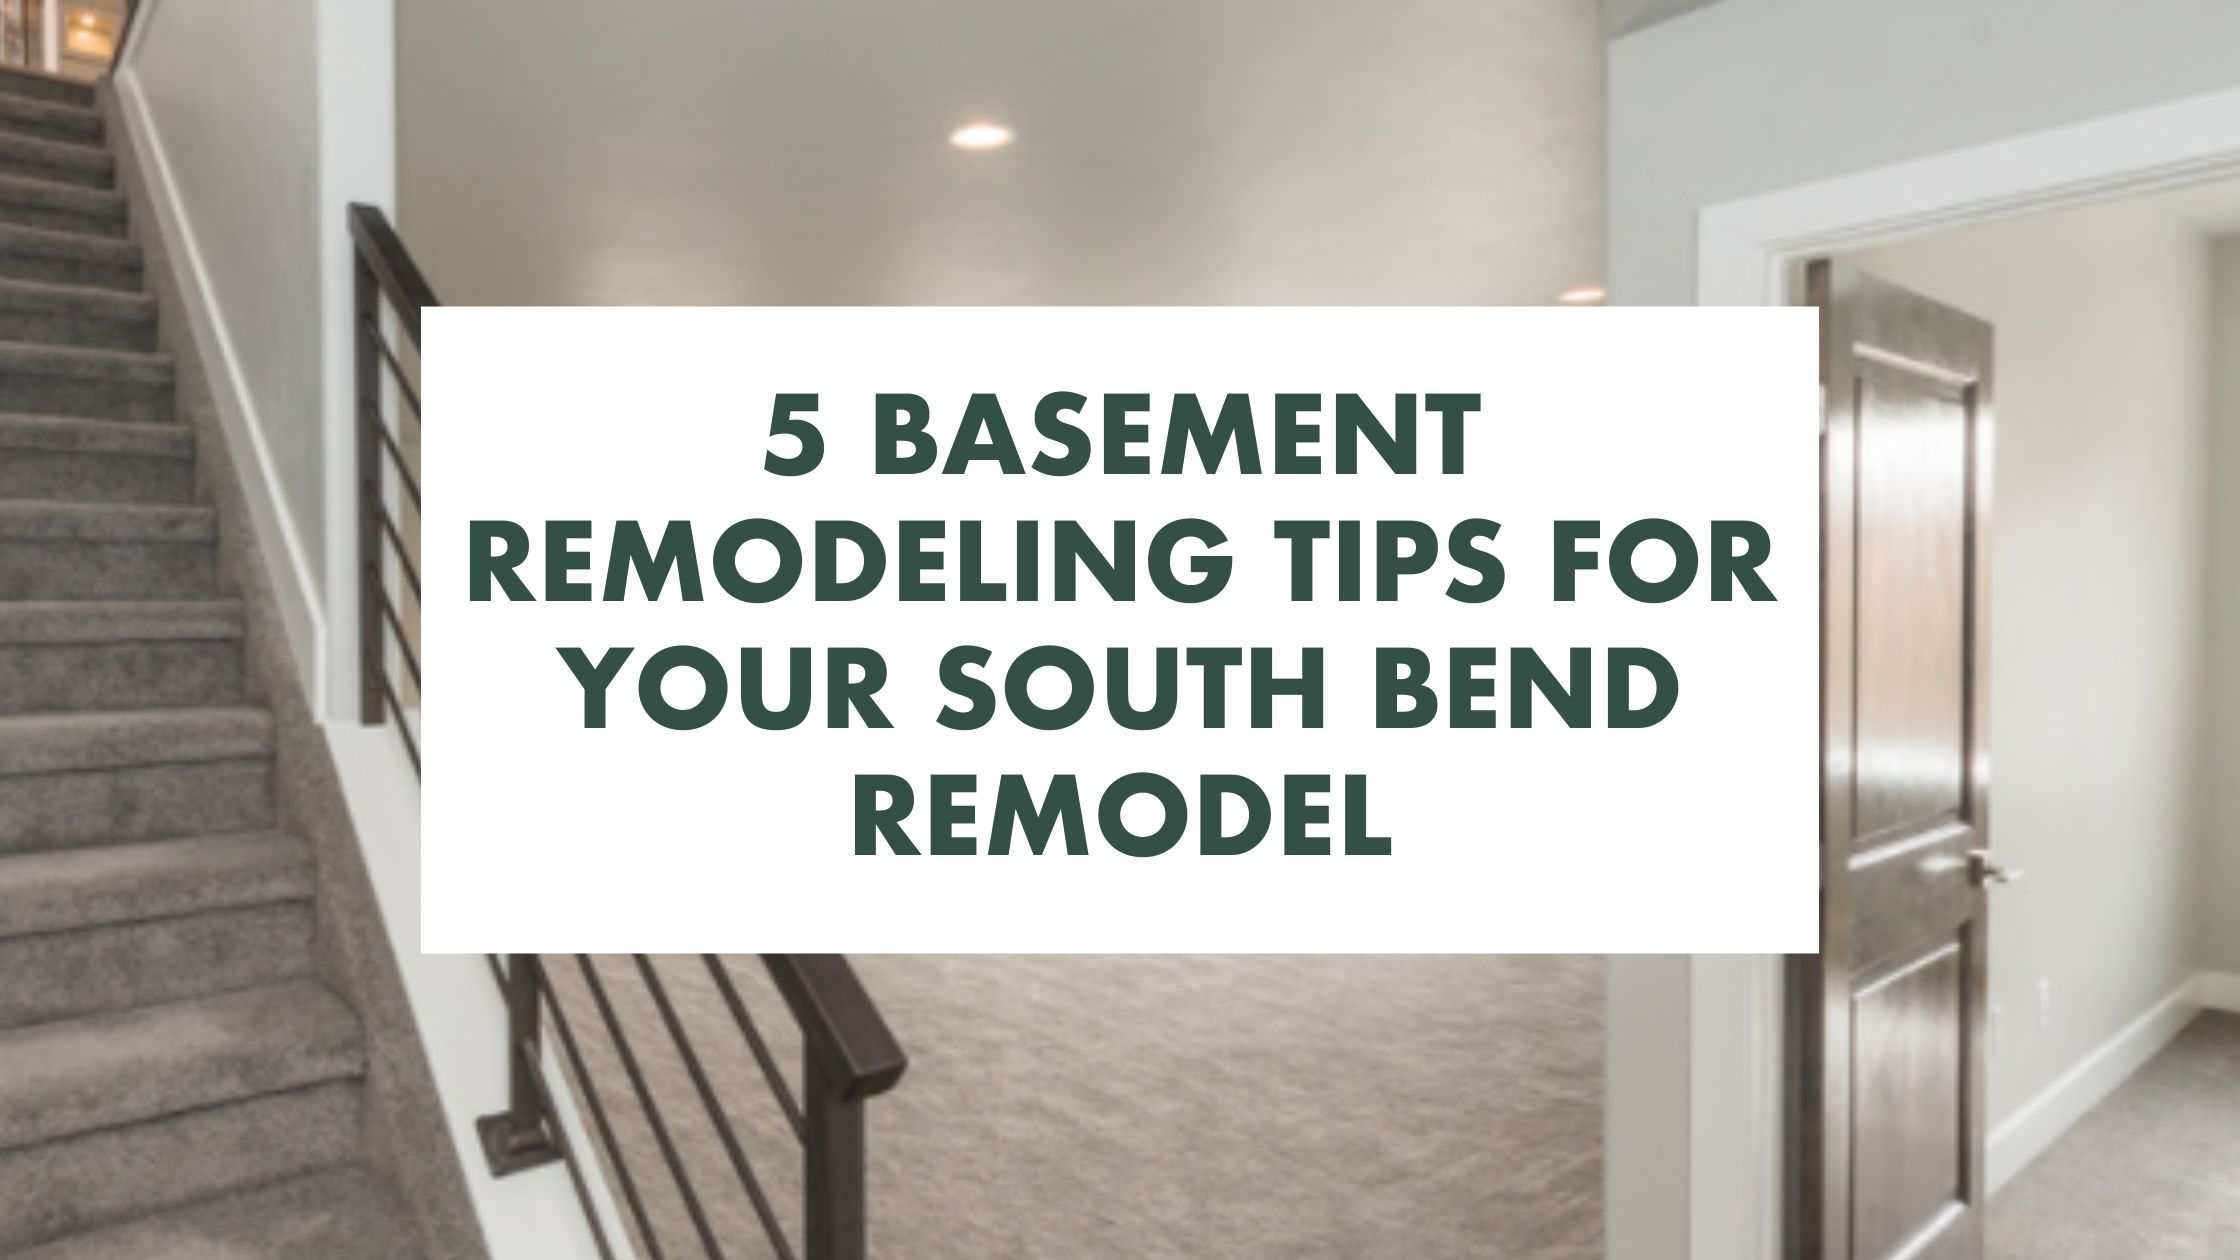 5 Basement Remodeling Tips For Your South Bend Remodel